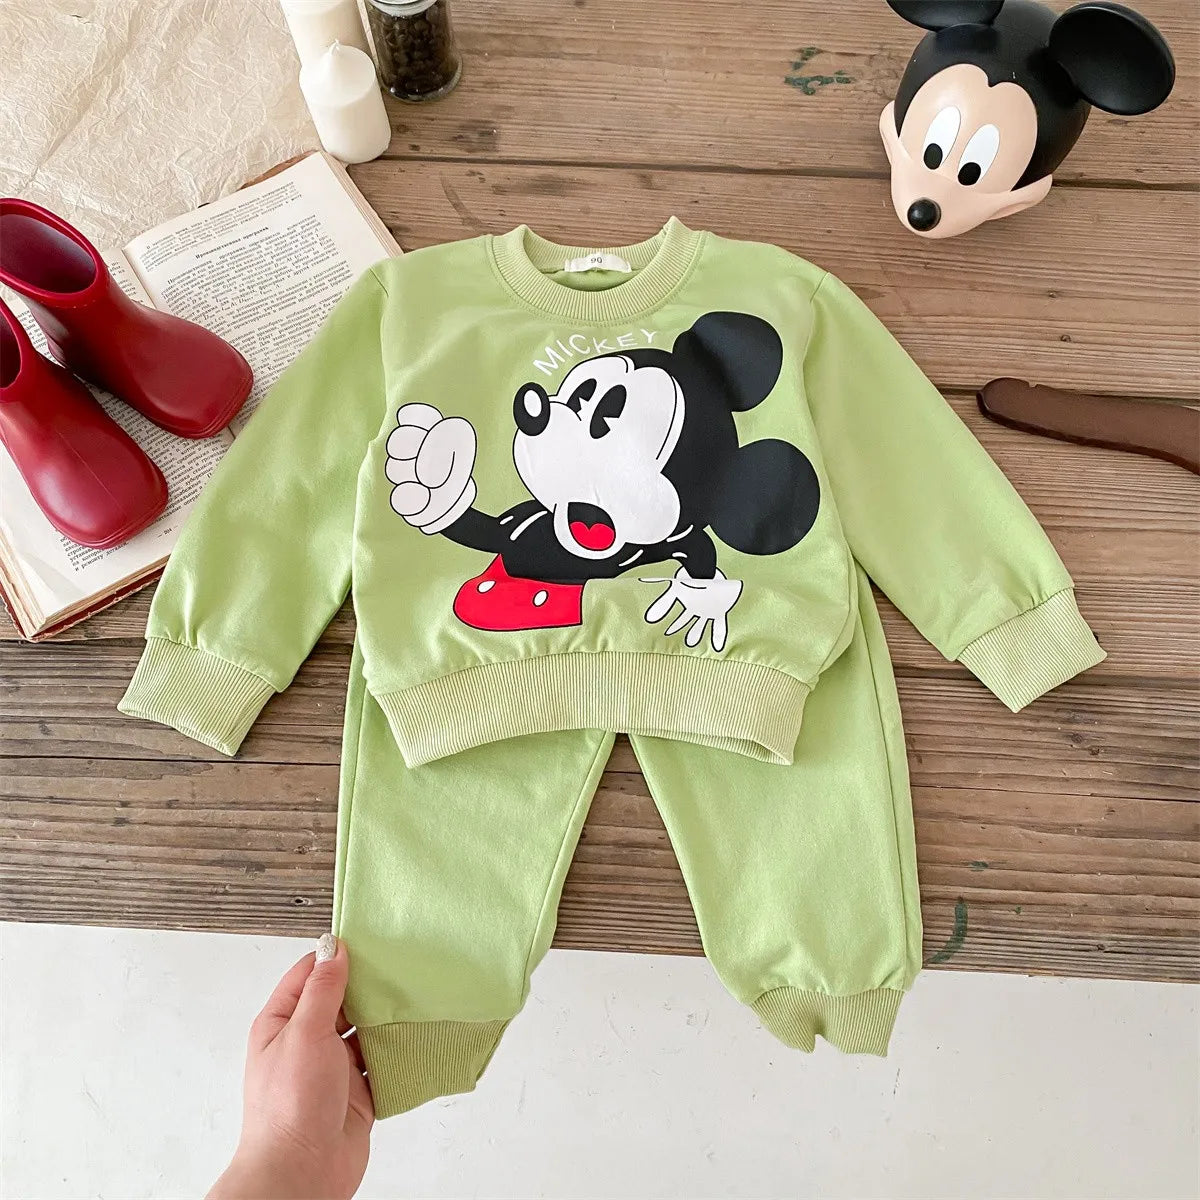 Lion Printed Sweatshirt Suit Baby Clothes Loose Fashion Cartoon Tracksuit Spring New Kids Long Sleeved Tops + Pants 2pc/set